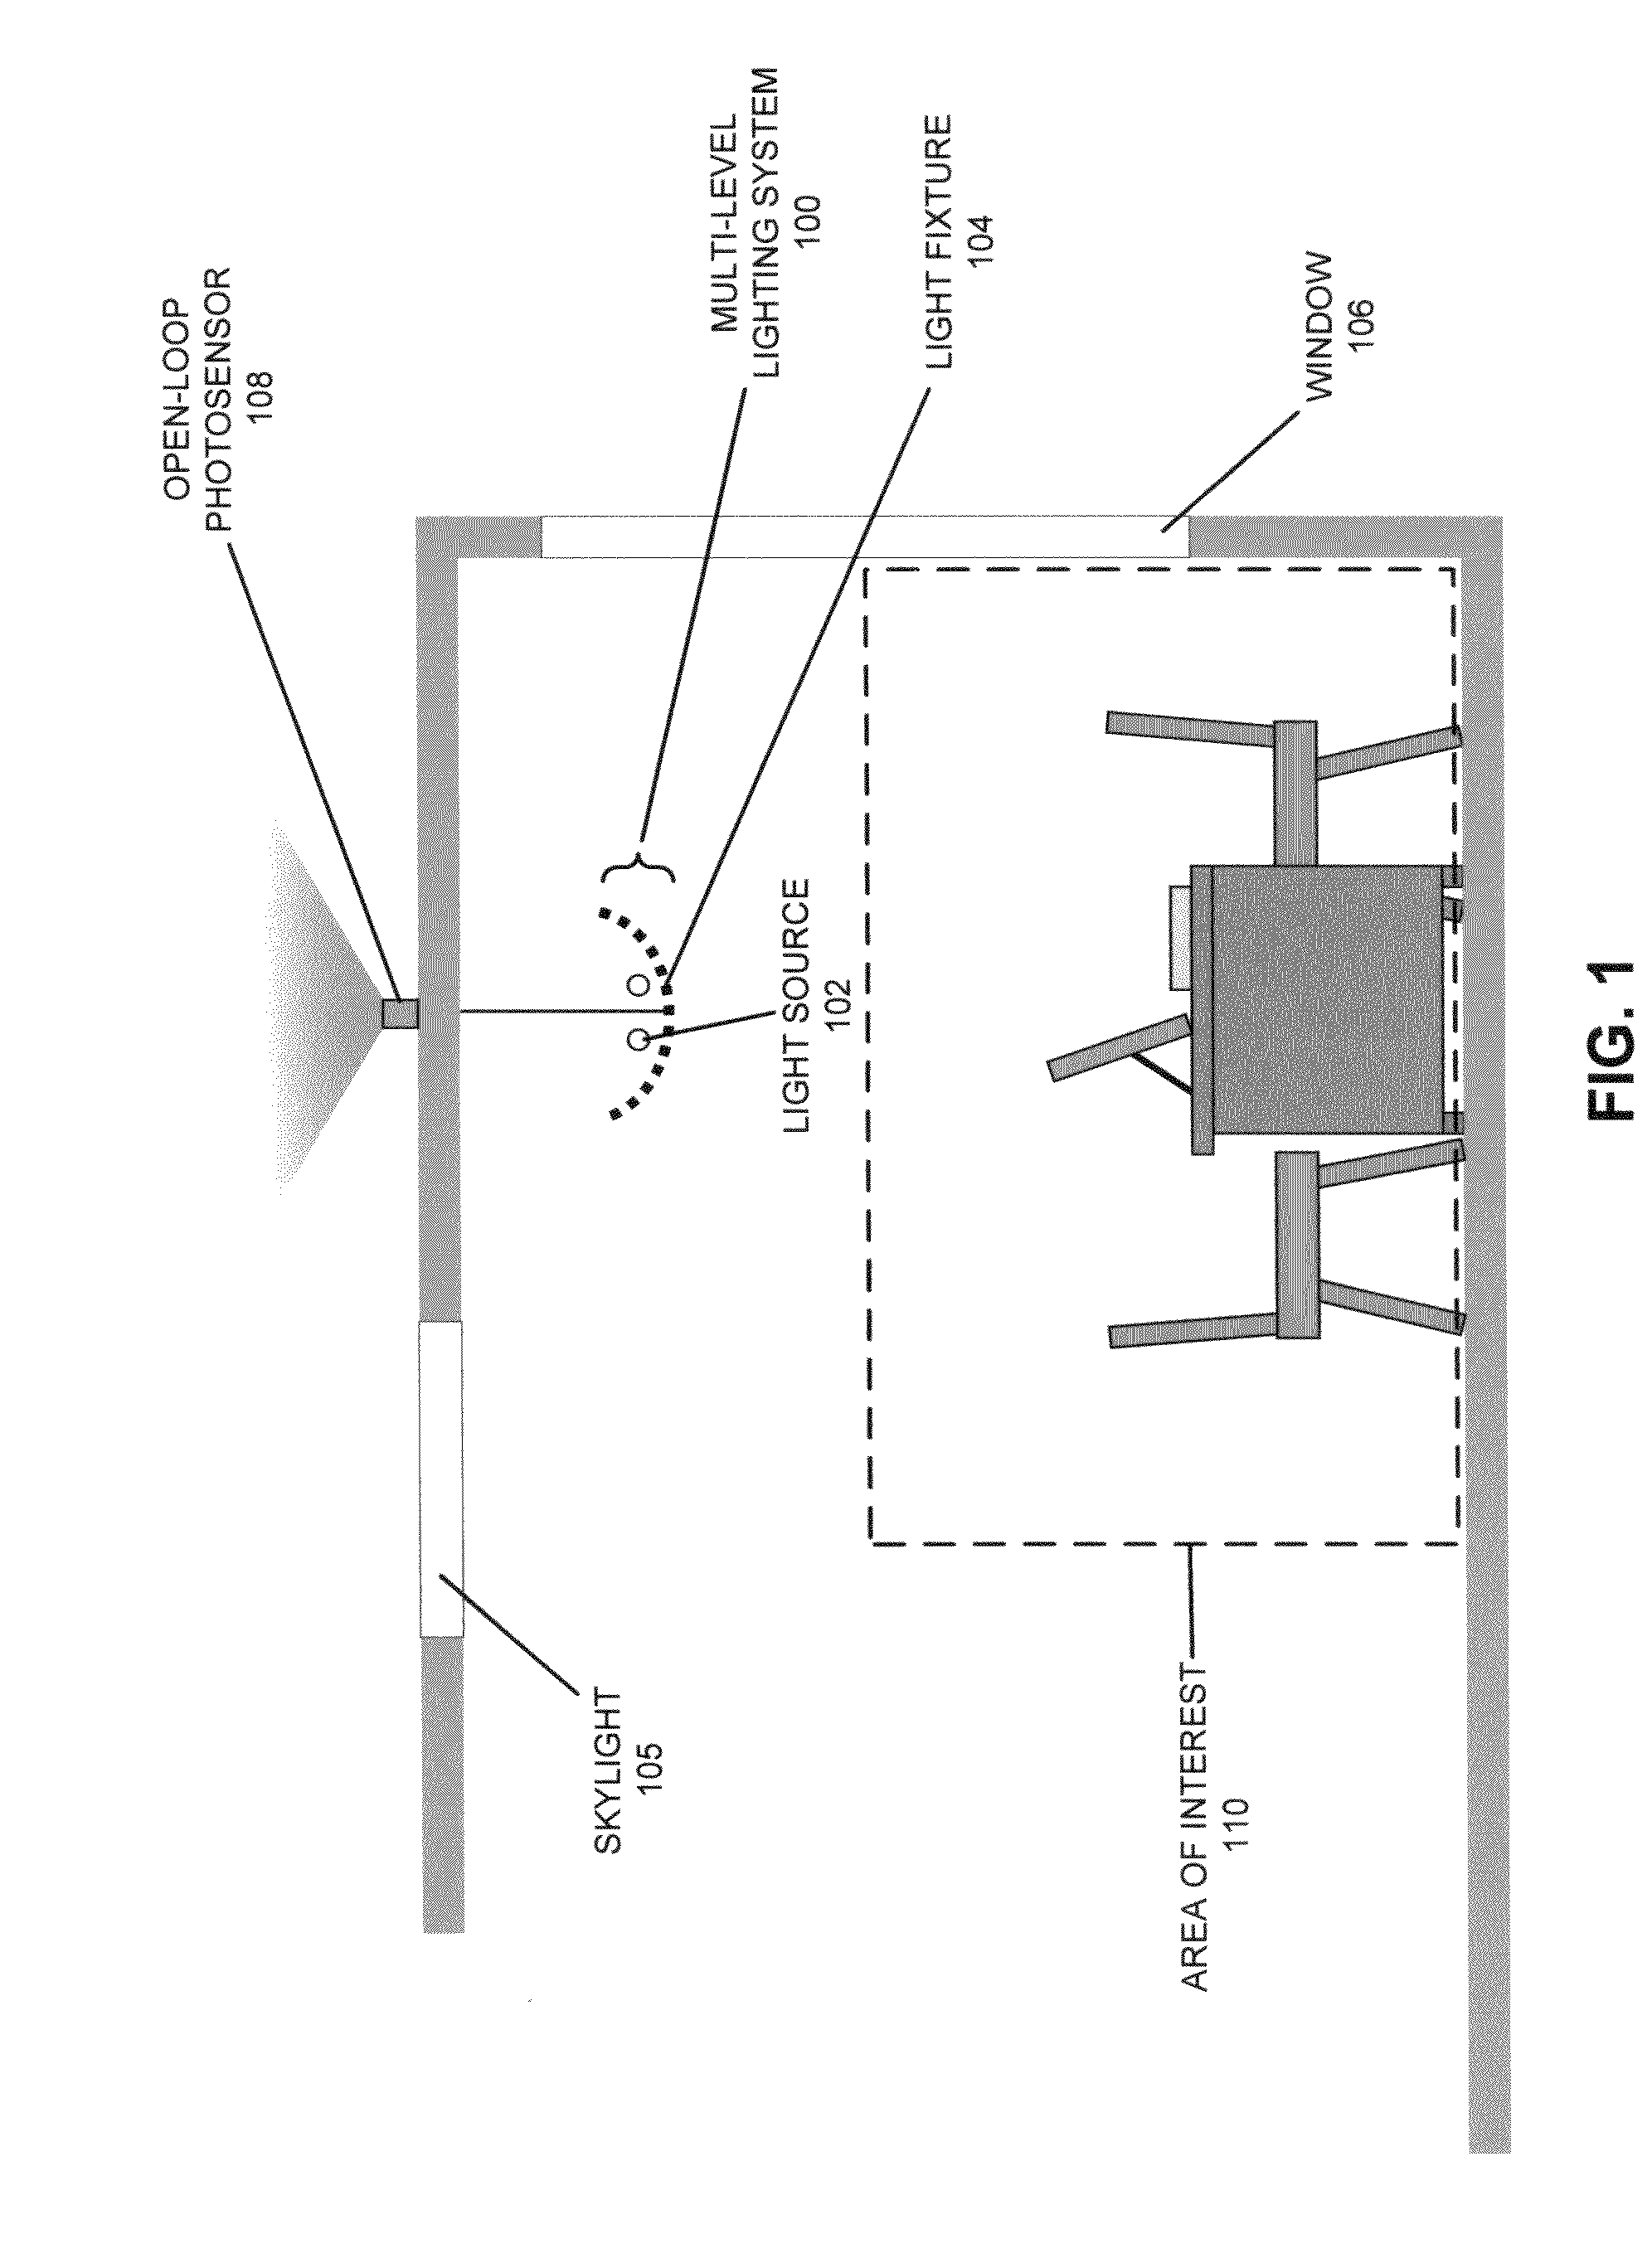 Method for preventing incorrect lighting adjustments in a daylight harvesting system